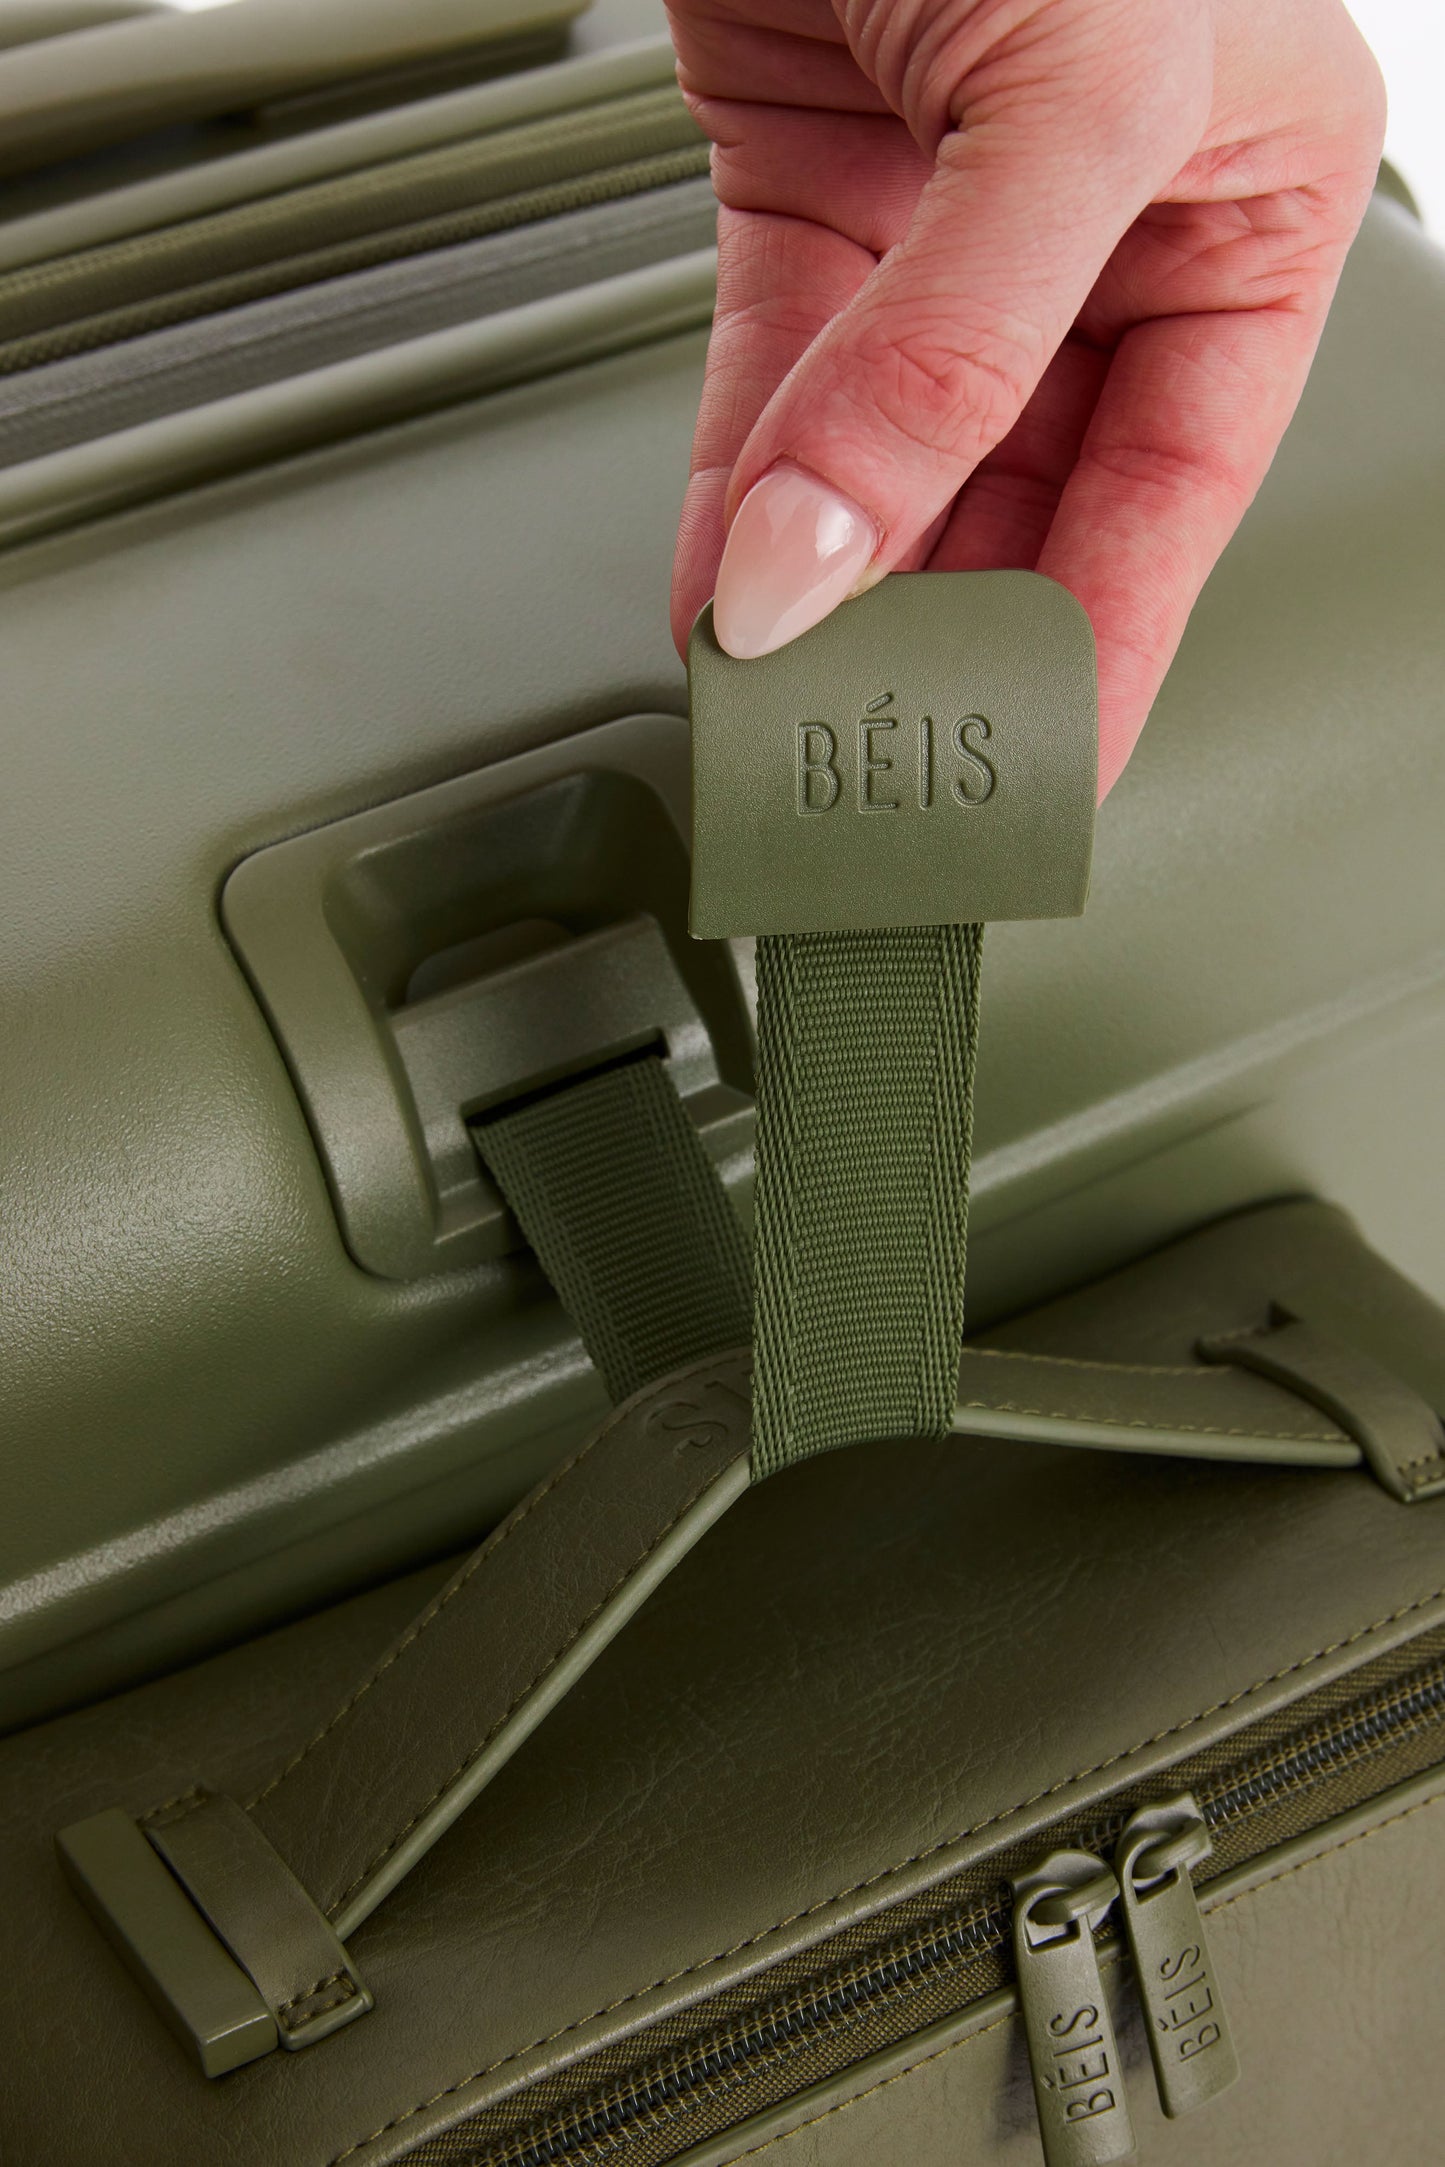 The Large Check-In Roller in Olive